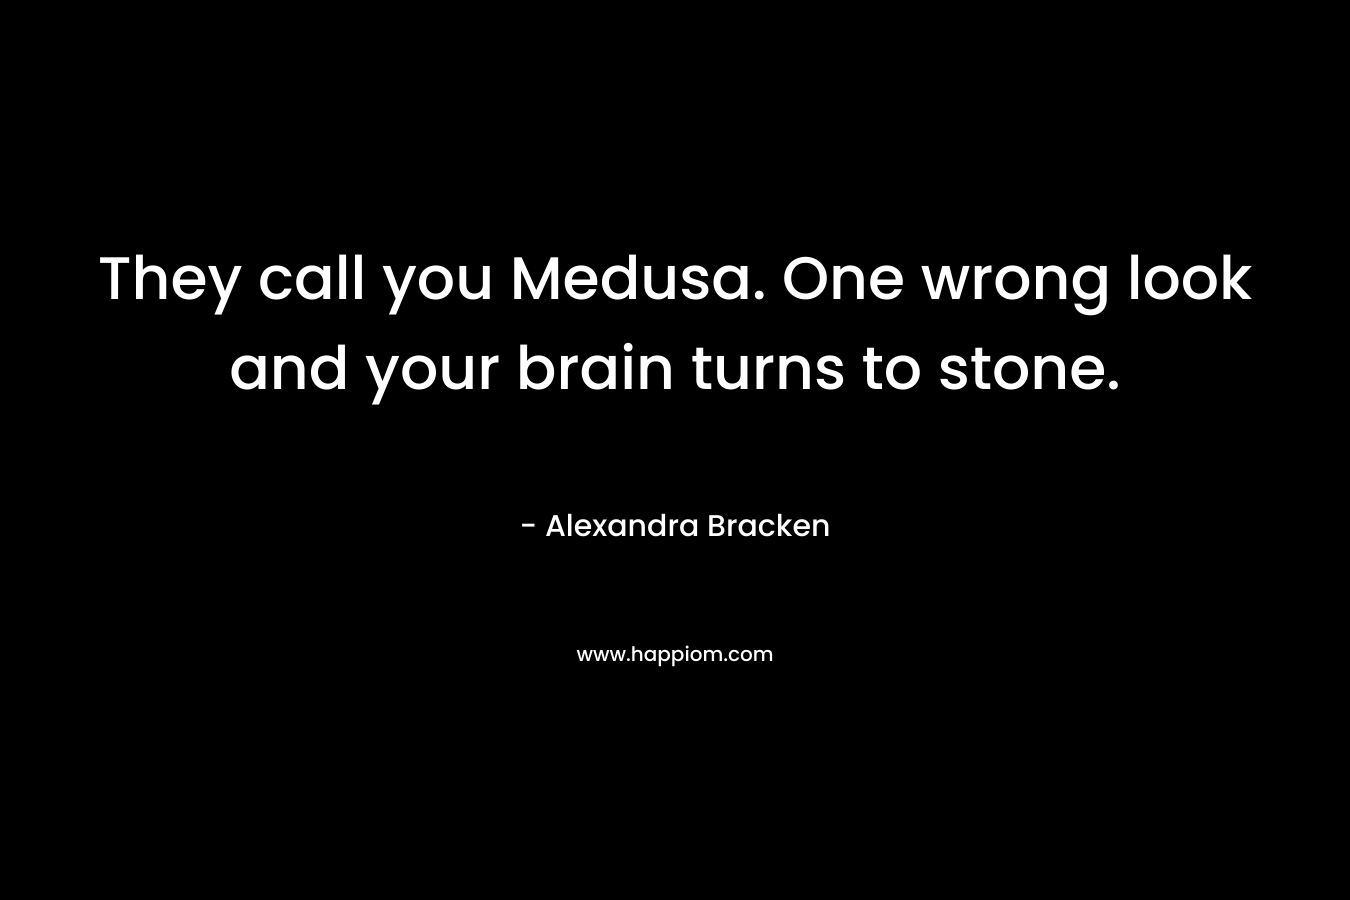 They call you Medusa. One wrong look and your brain turns to stone. – Alexandra Bracken